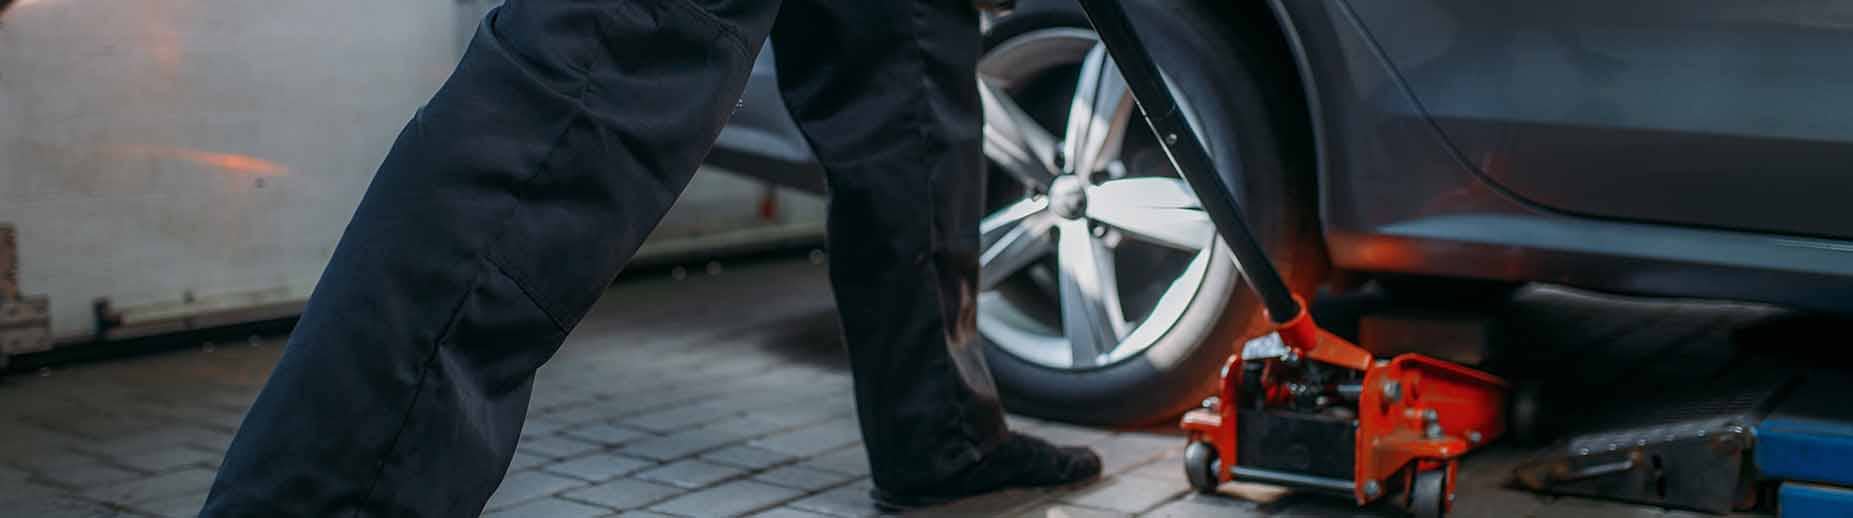 Lawrence Tire Balancing Services, Tire Rotation and Tire Repair